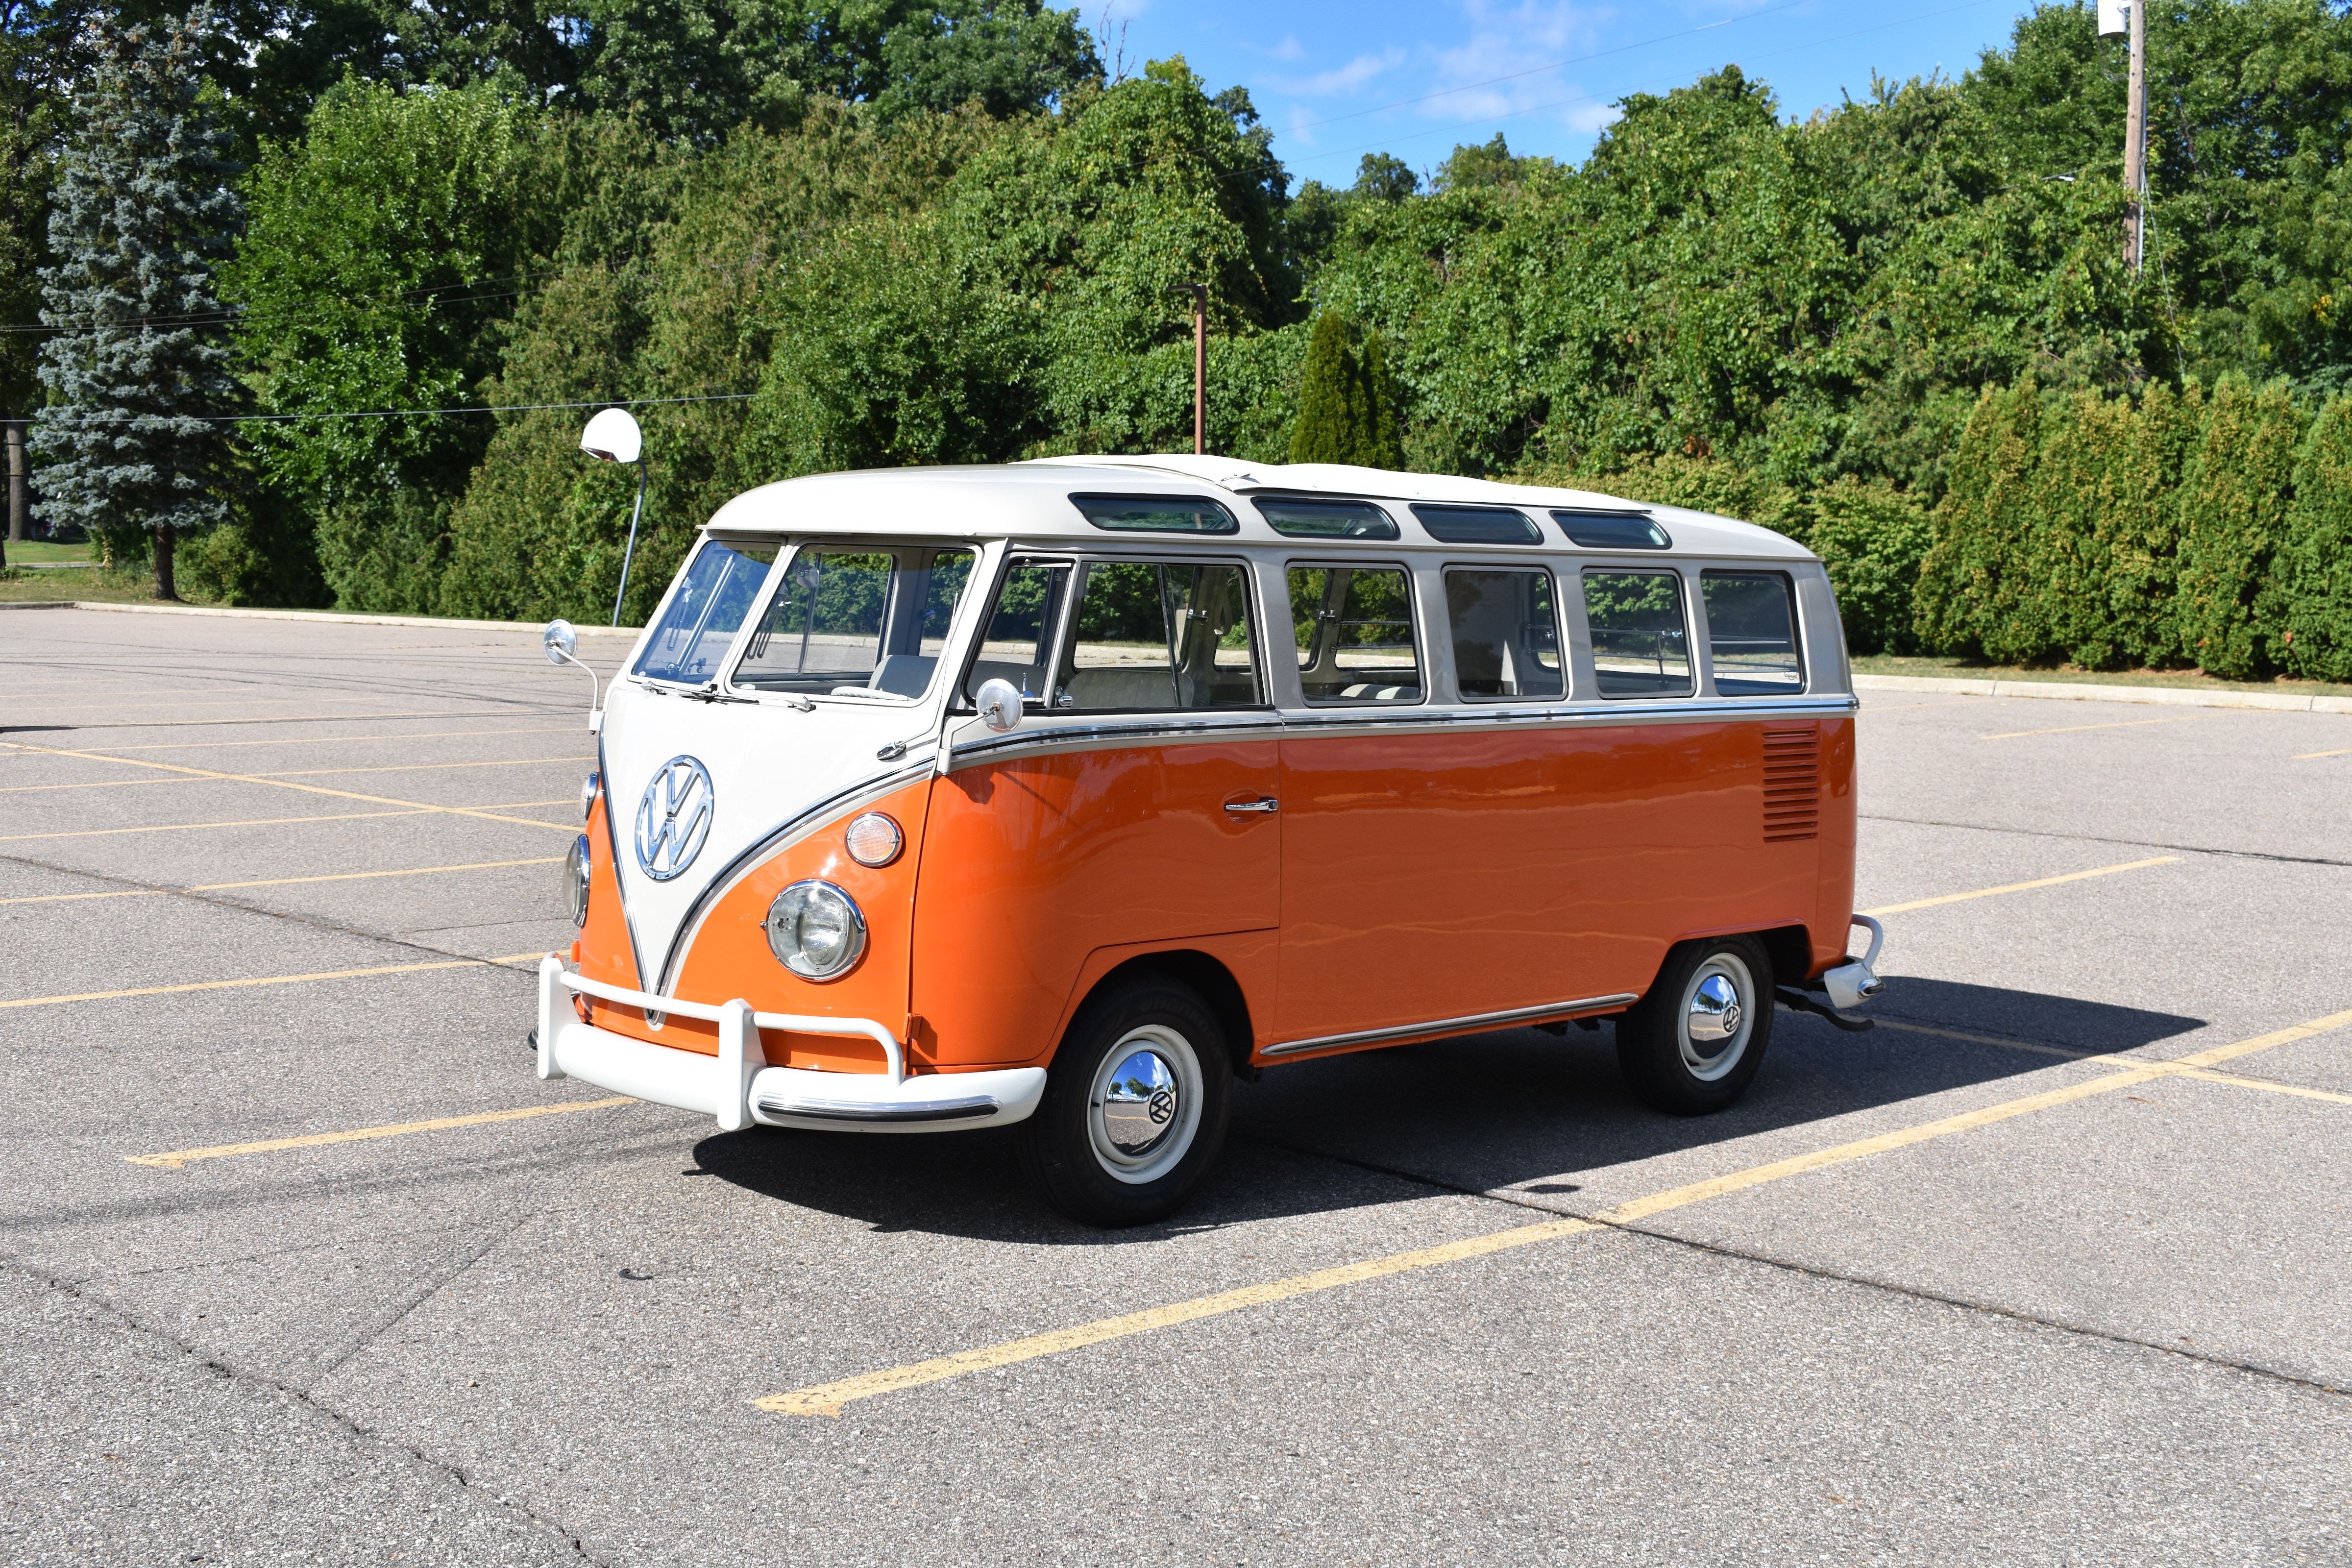 bibliotek syreindhold underviser 5 Things to Know About Driving an Old Volkswagen Bus